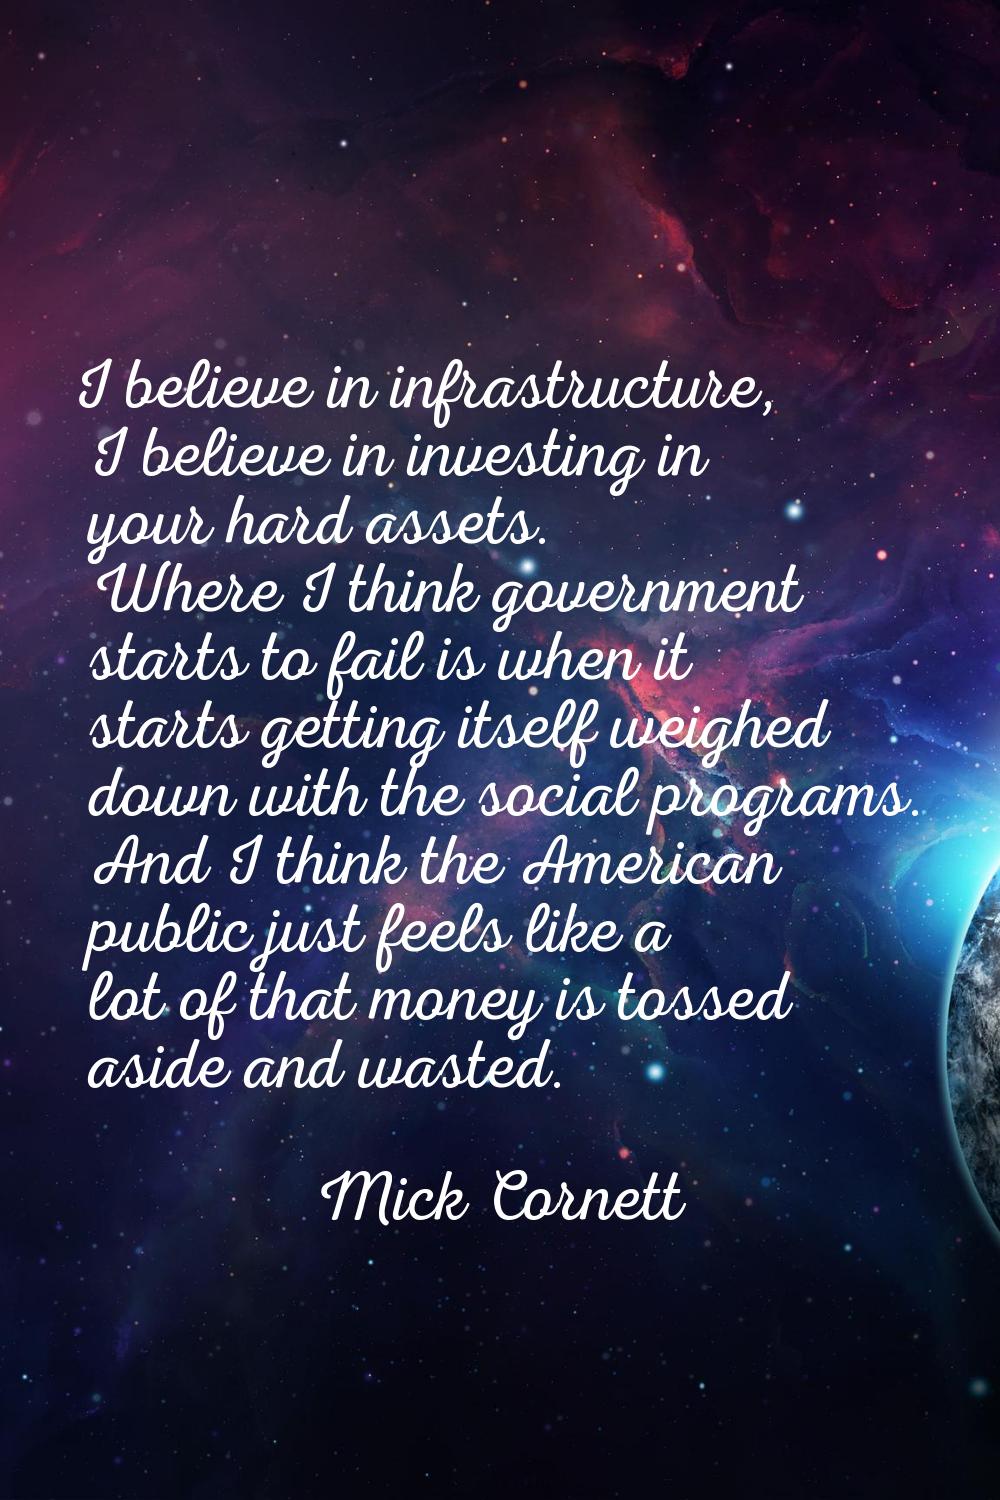 I believe in infrastructure, I believe in investing in your hard assets. Where I think government s